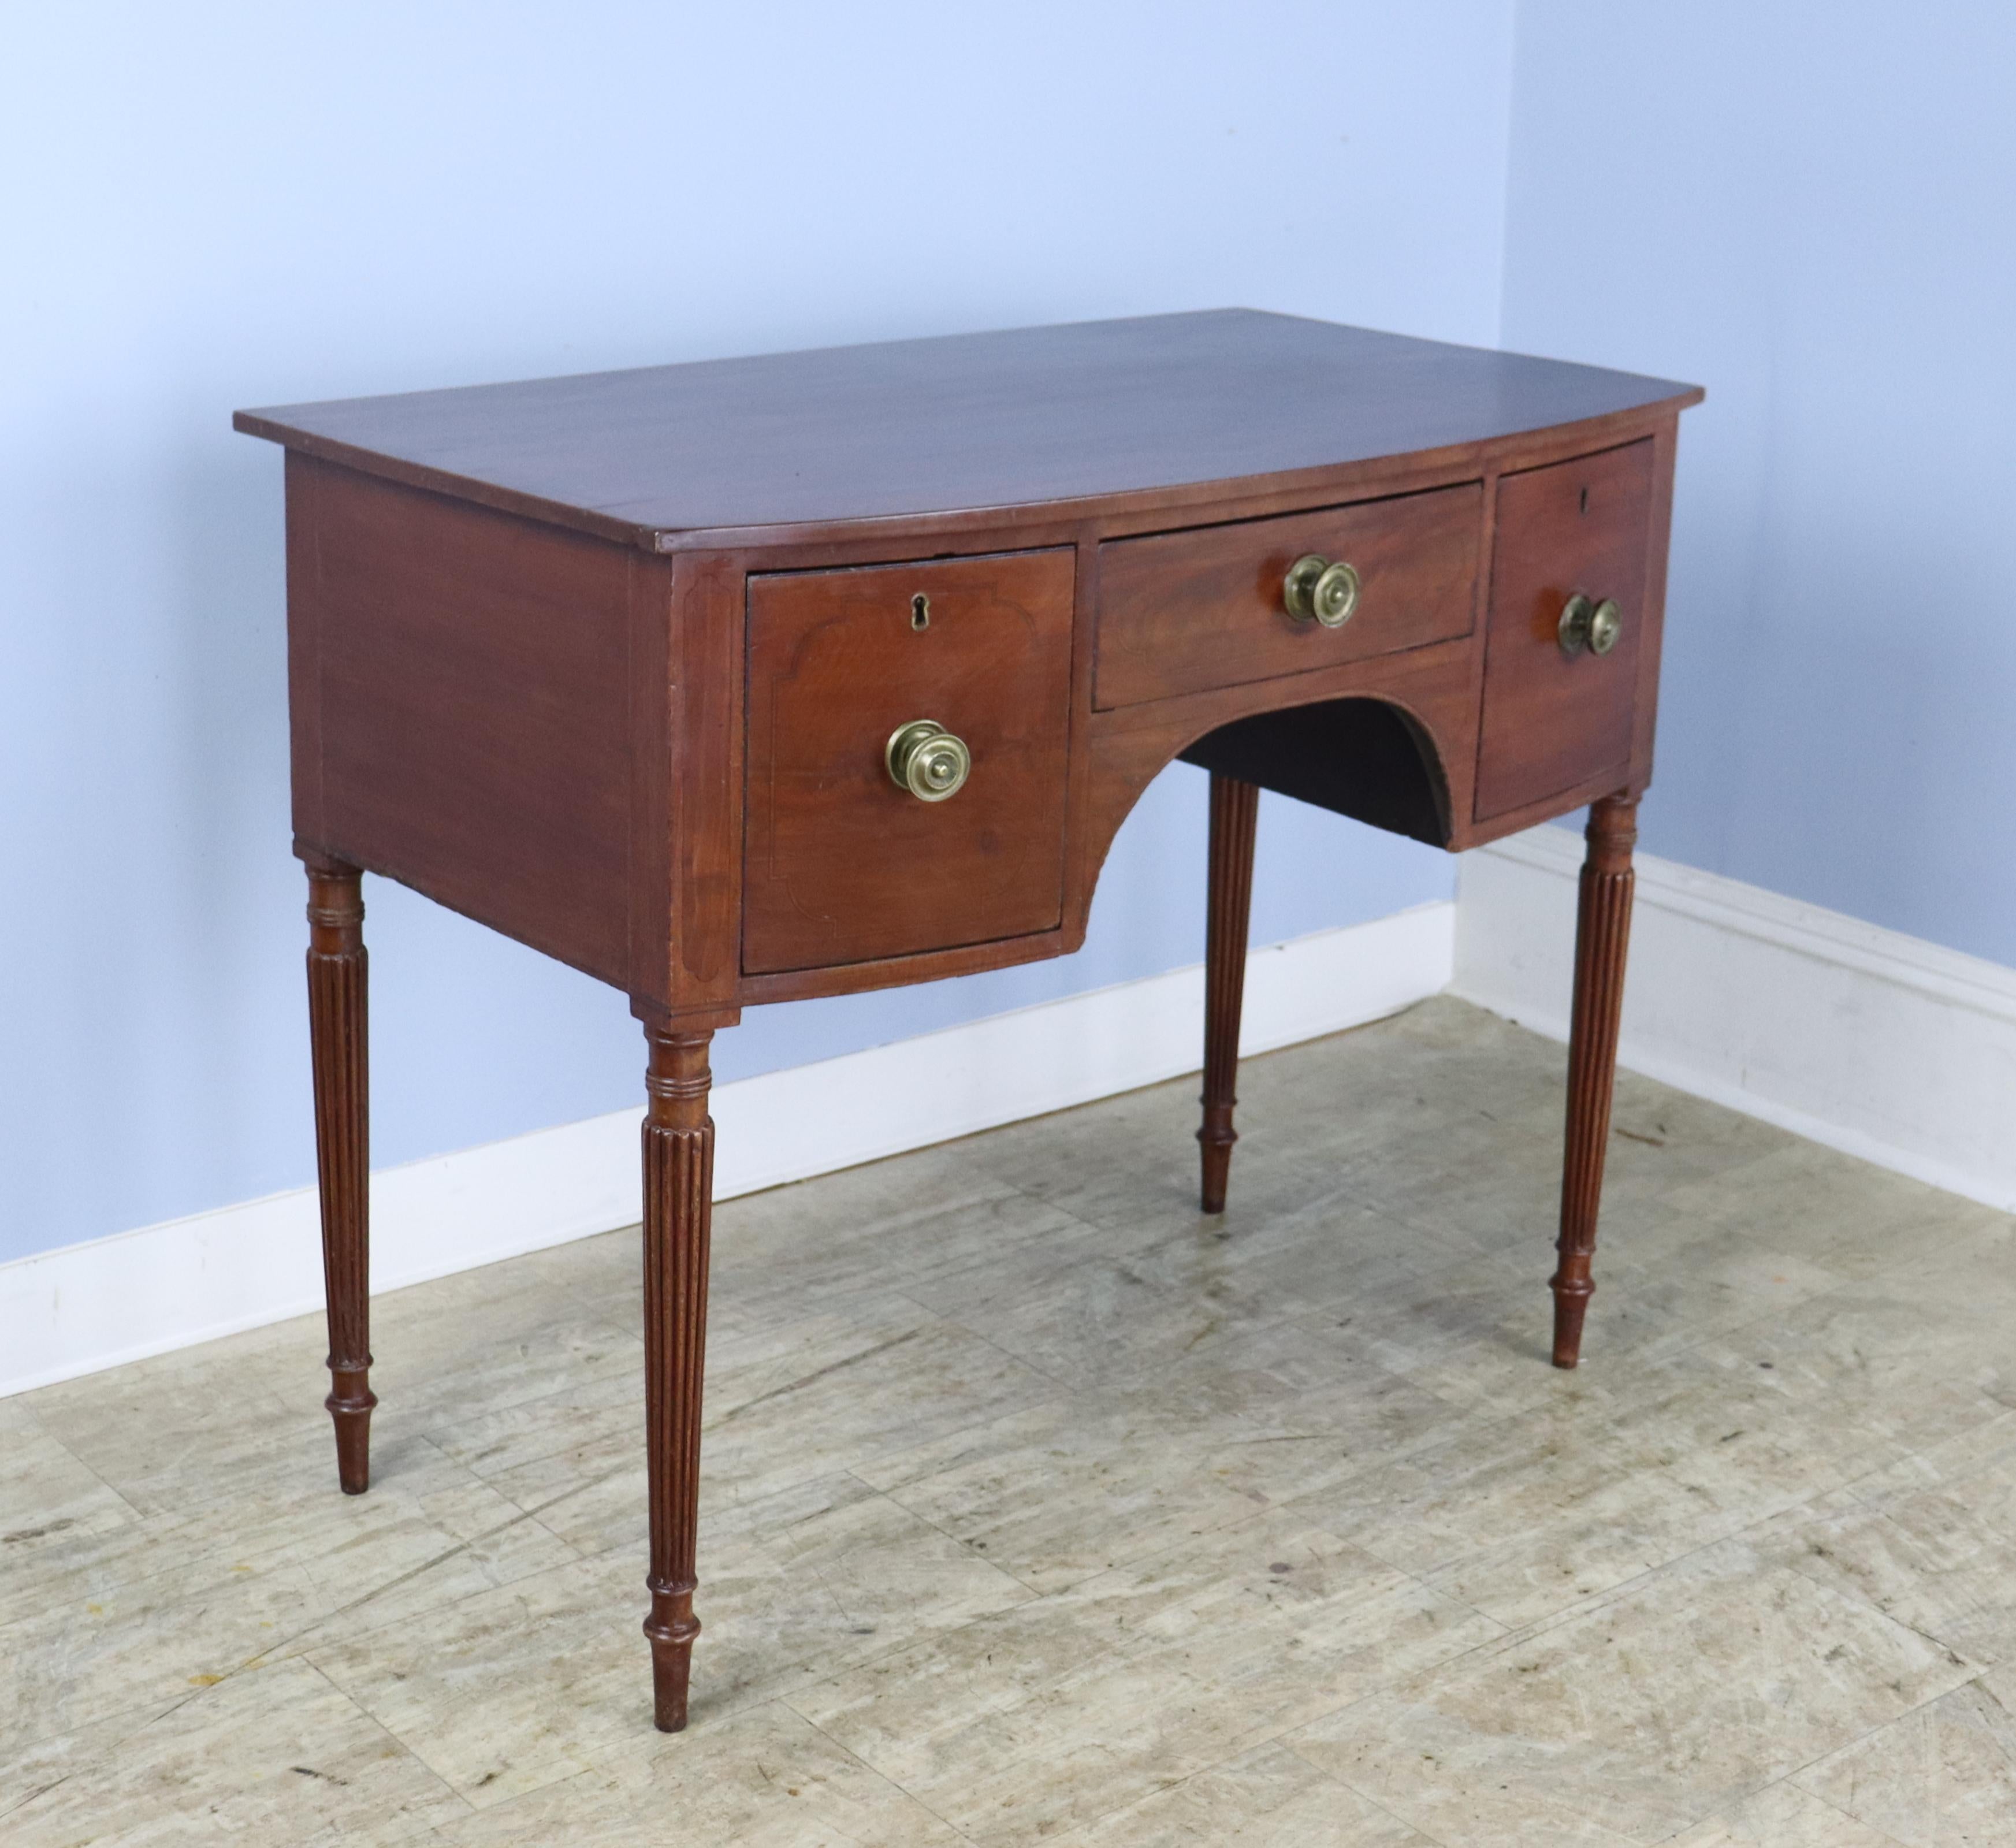 An 18th Century Georgian mahogany side table, hall table or serving table with ebony stringing along the top and drawers.  The piece is in good antique condition with a small mark on the top, shown, and some fine wear at the edges - to be expected